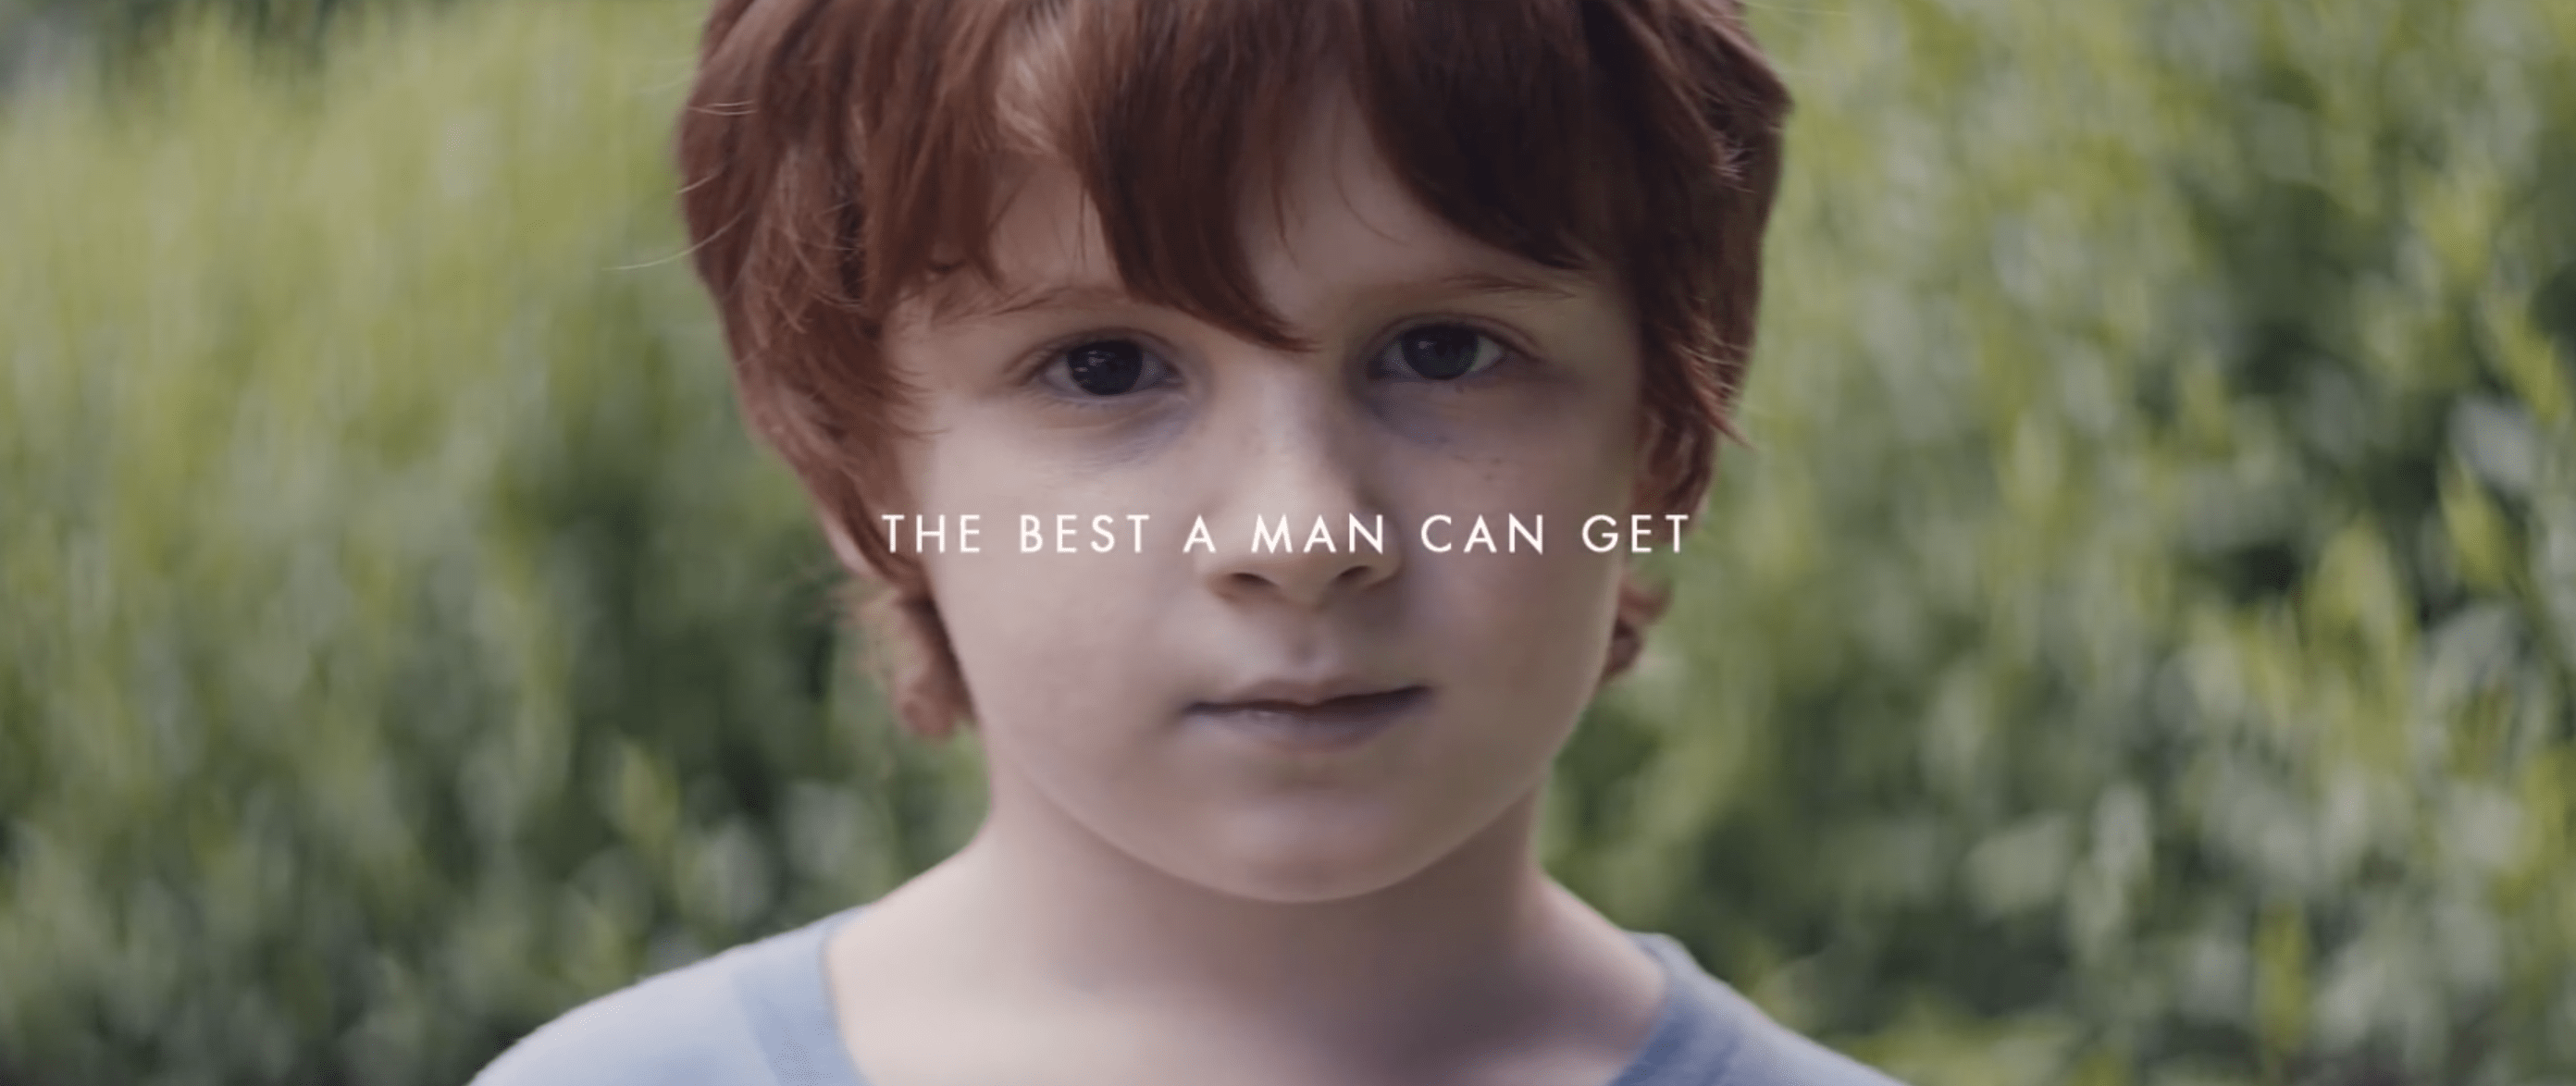 Gilette, Threatened To Lose Customers Over Controversial “We Believe” Ad